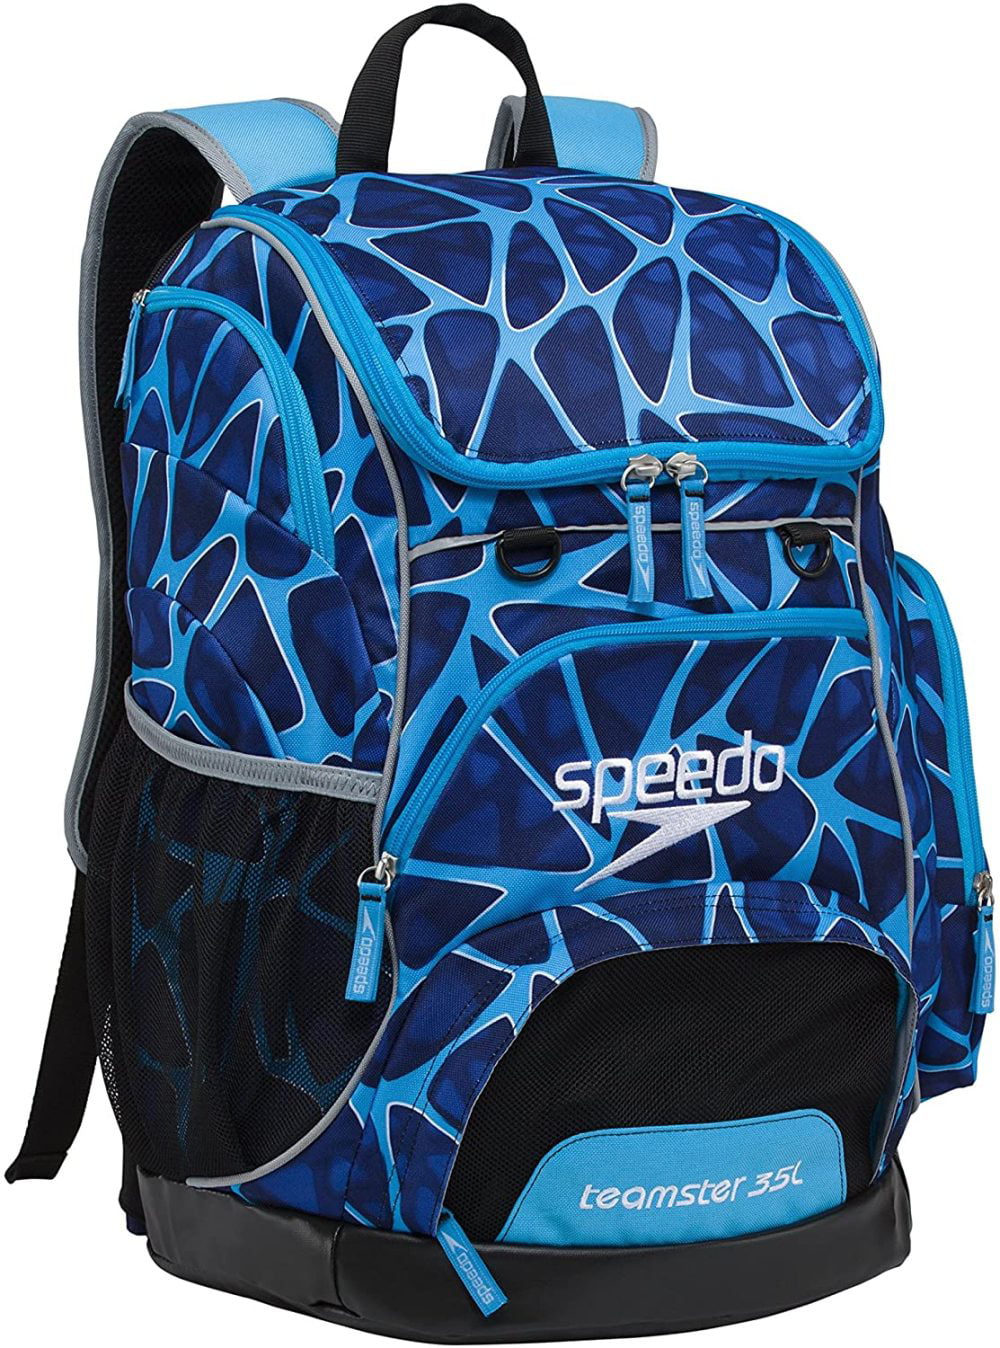 Speedo Large Teamster Backpack 35-Liter One Size White/Blue 